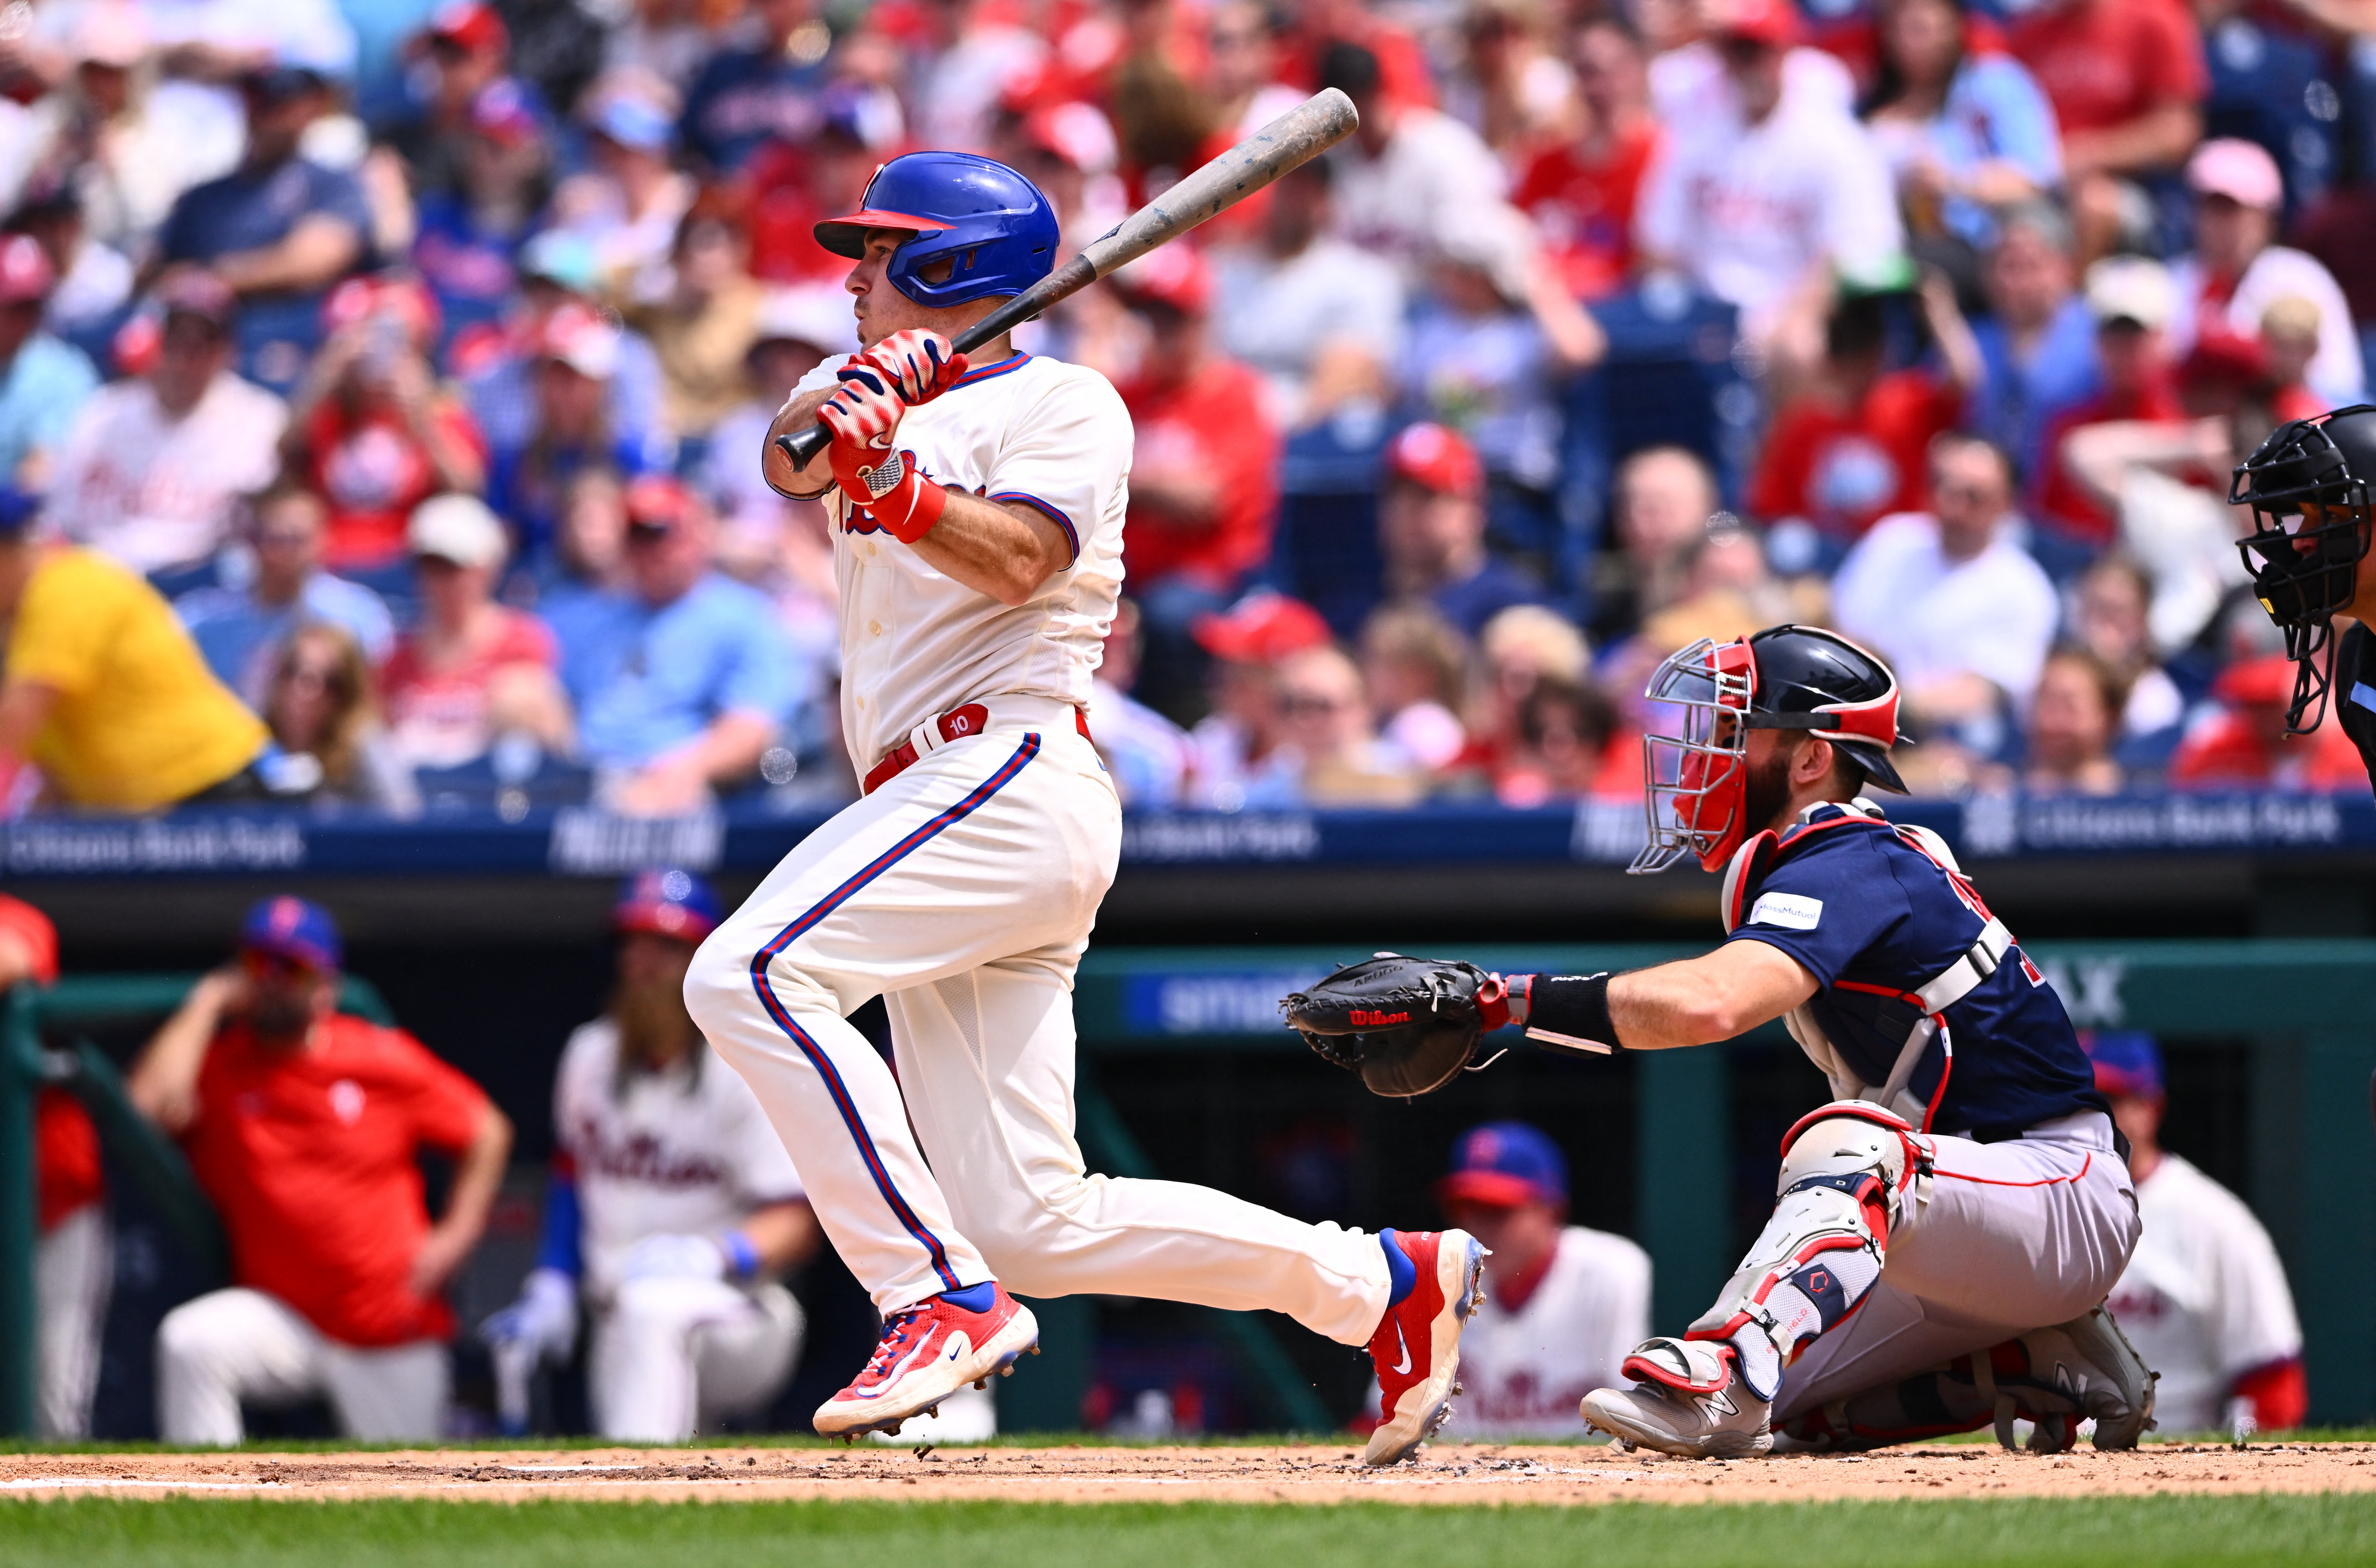 Kyle Schwarber's slump ends on special day at Citizens Bank Park